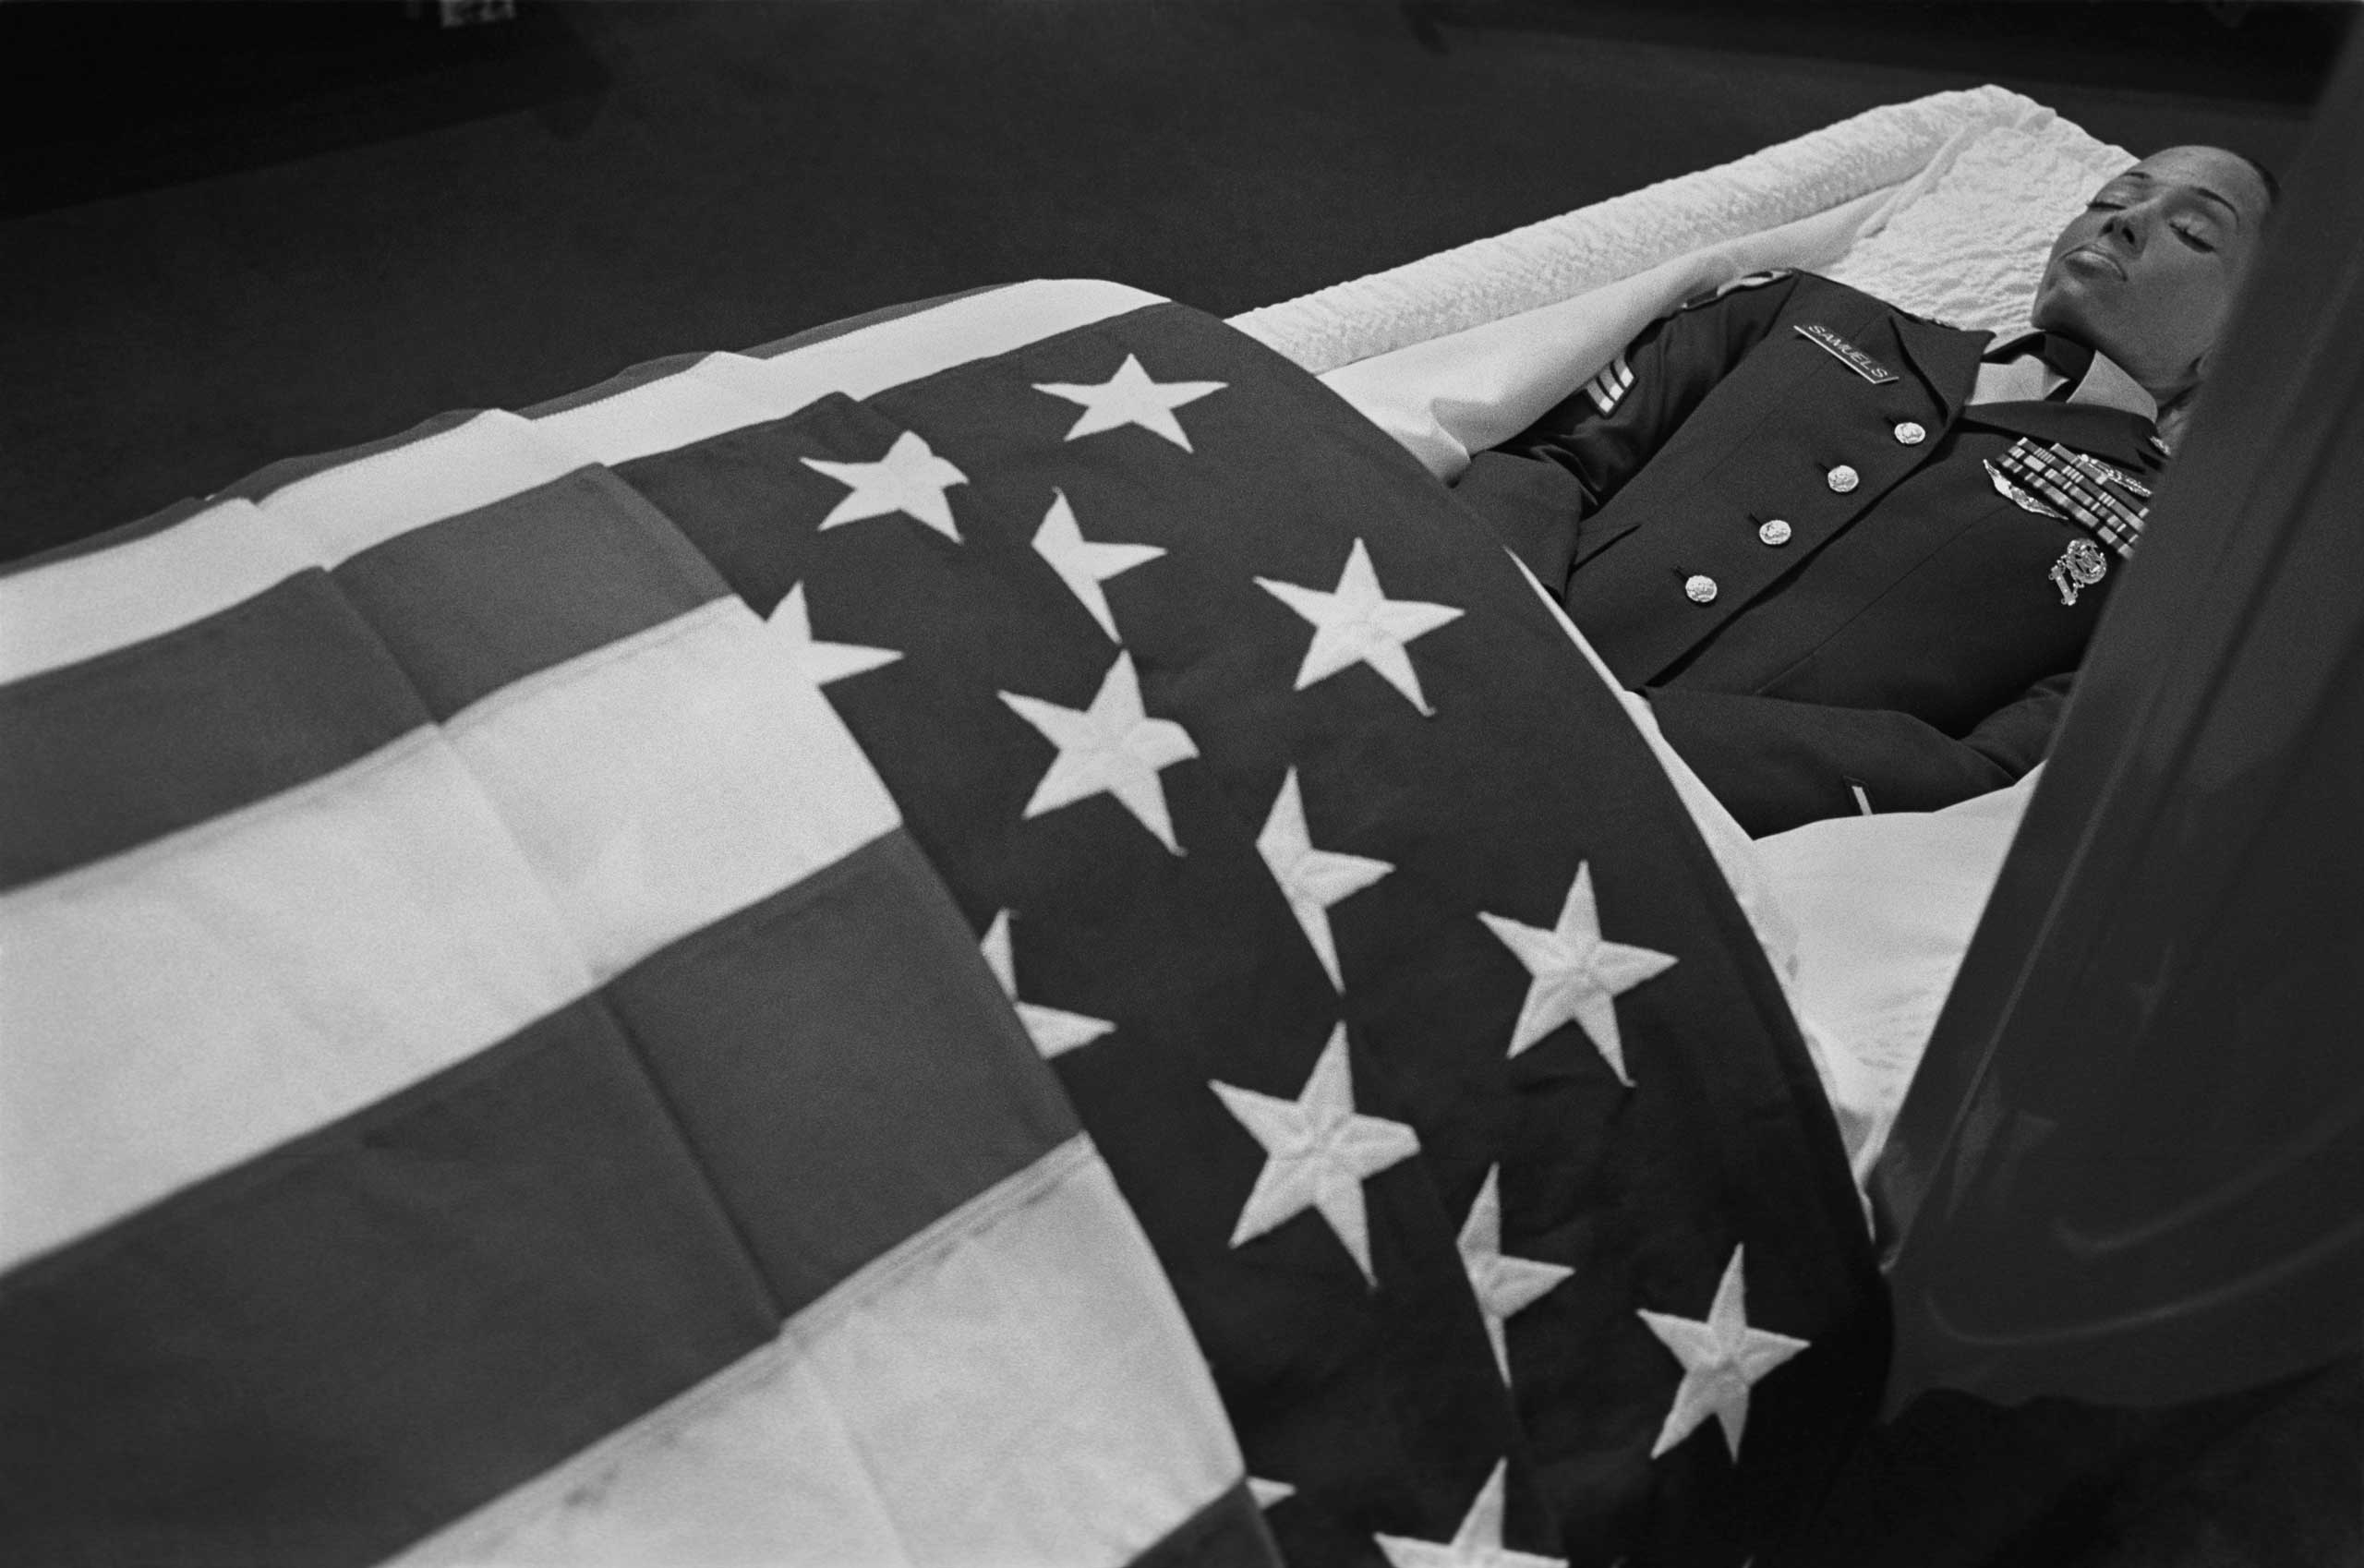 Sergeant Princess Samuels.
                              Eugene Richards, Aug. 31, 2007. Landover, Md.
                              
                               The flag-draped coffin holding Sergeant Princess Samuels was wheeled slowly down the aisle into the chapel. Then, though I’d been told that the coffin would remain closed, the lid was raised. In the sudden glare of the overhead light, what I saw at first seemed an image out of a fairy tale: a beautiful young woman asleep in a kind of jewelry box. When I moved closer, I could see the unnatural thinness, brittleness of her eyelids, her swollen, impacted lips and the scars that ran down her face beneath her jaw.